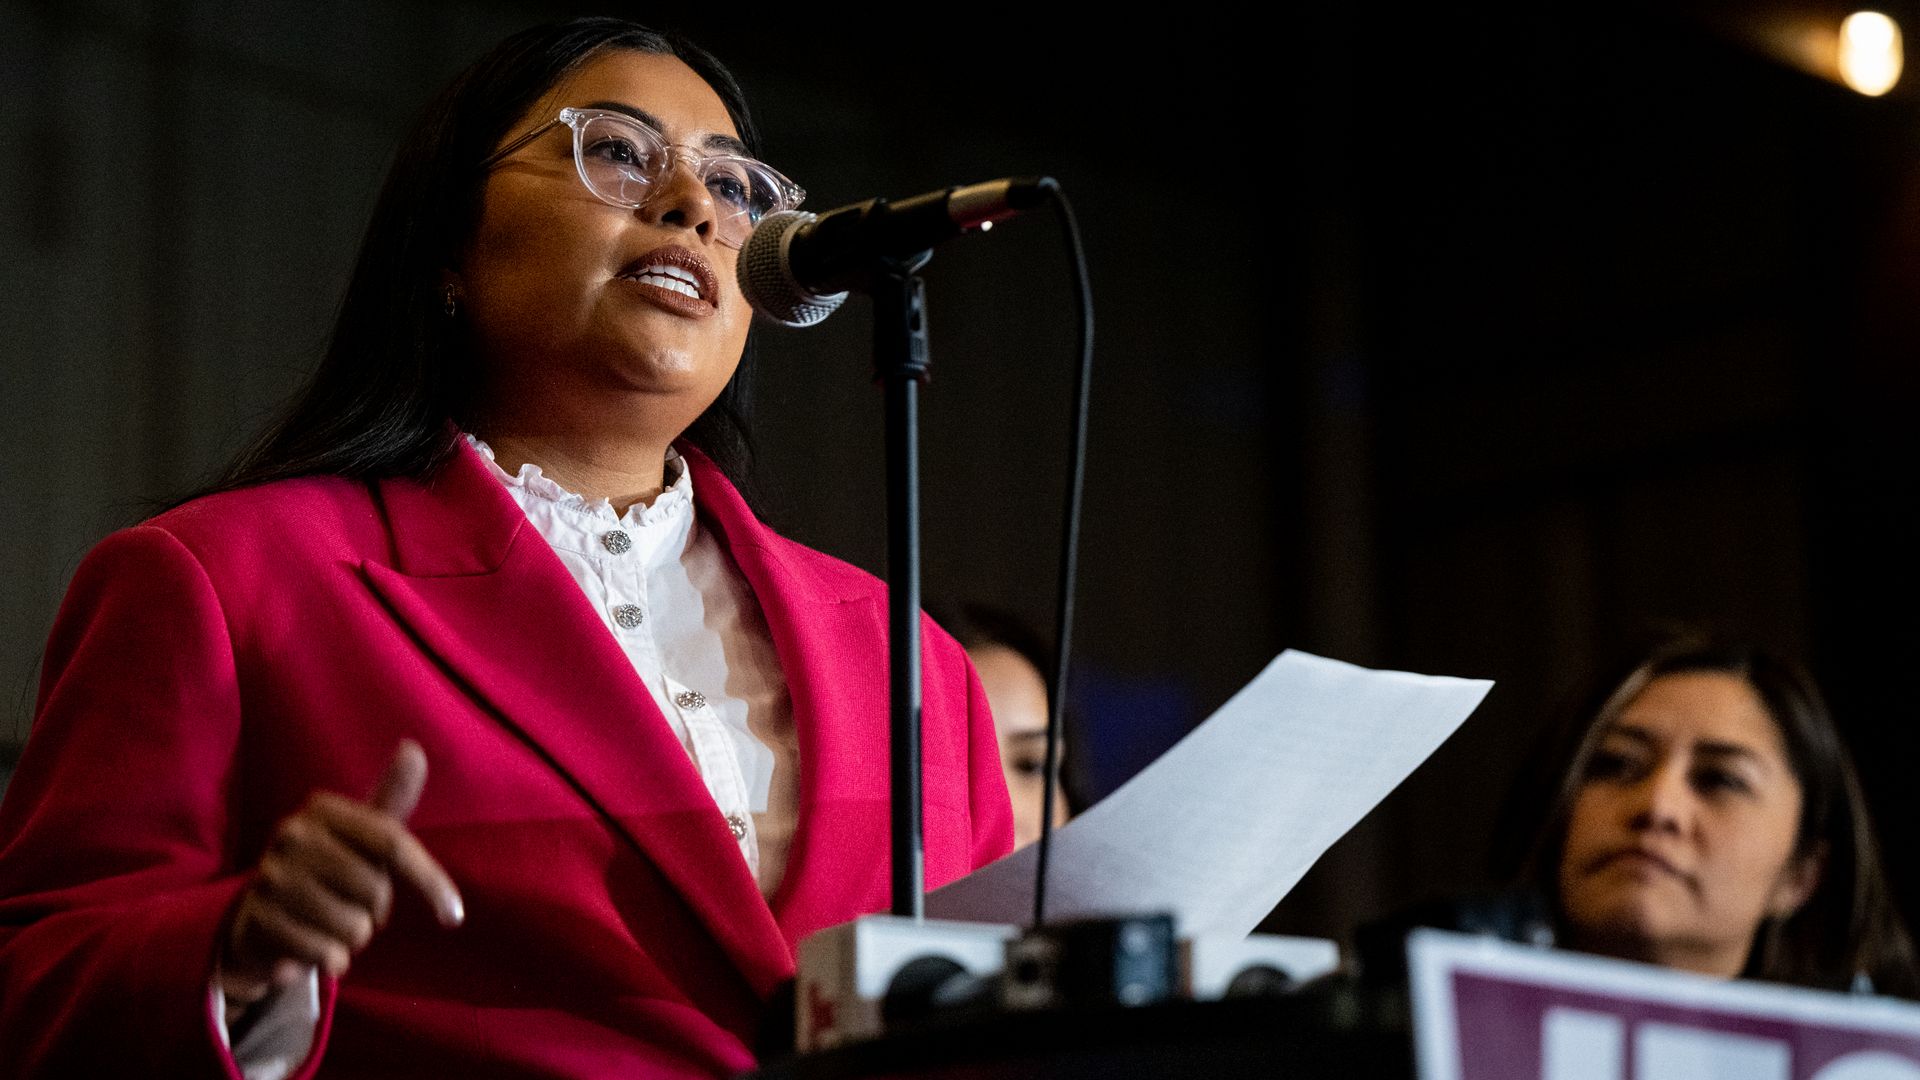 U.S. House candidate Jessica Cisneros of south Texas speaks in front of a microphone in March 2022